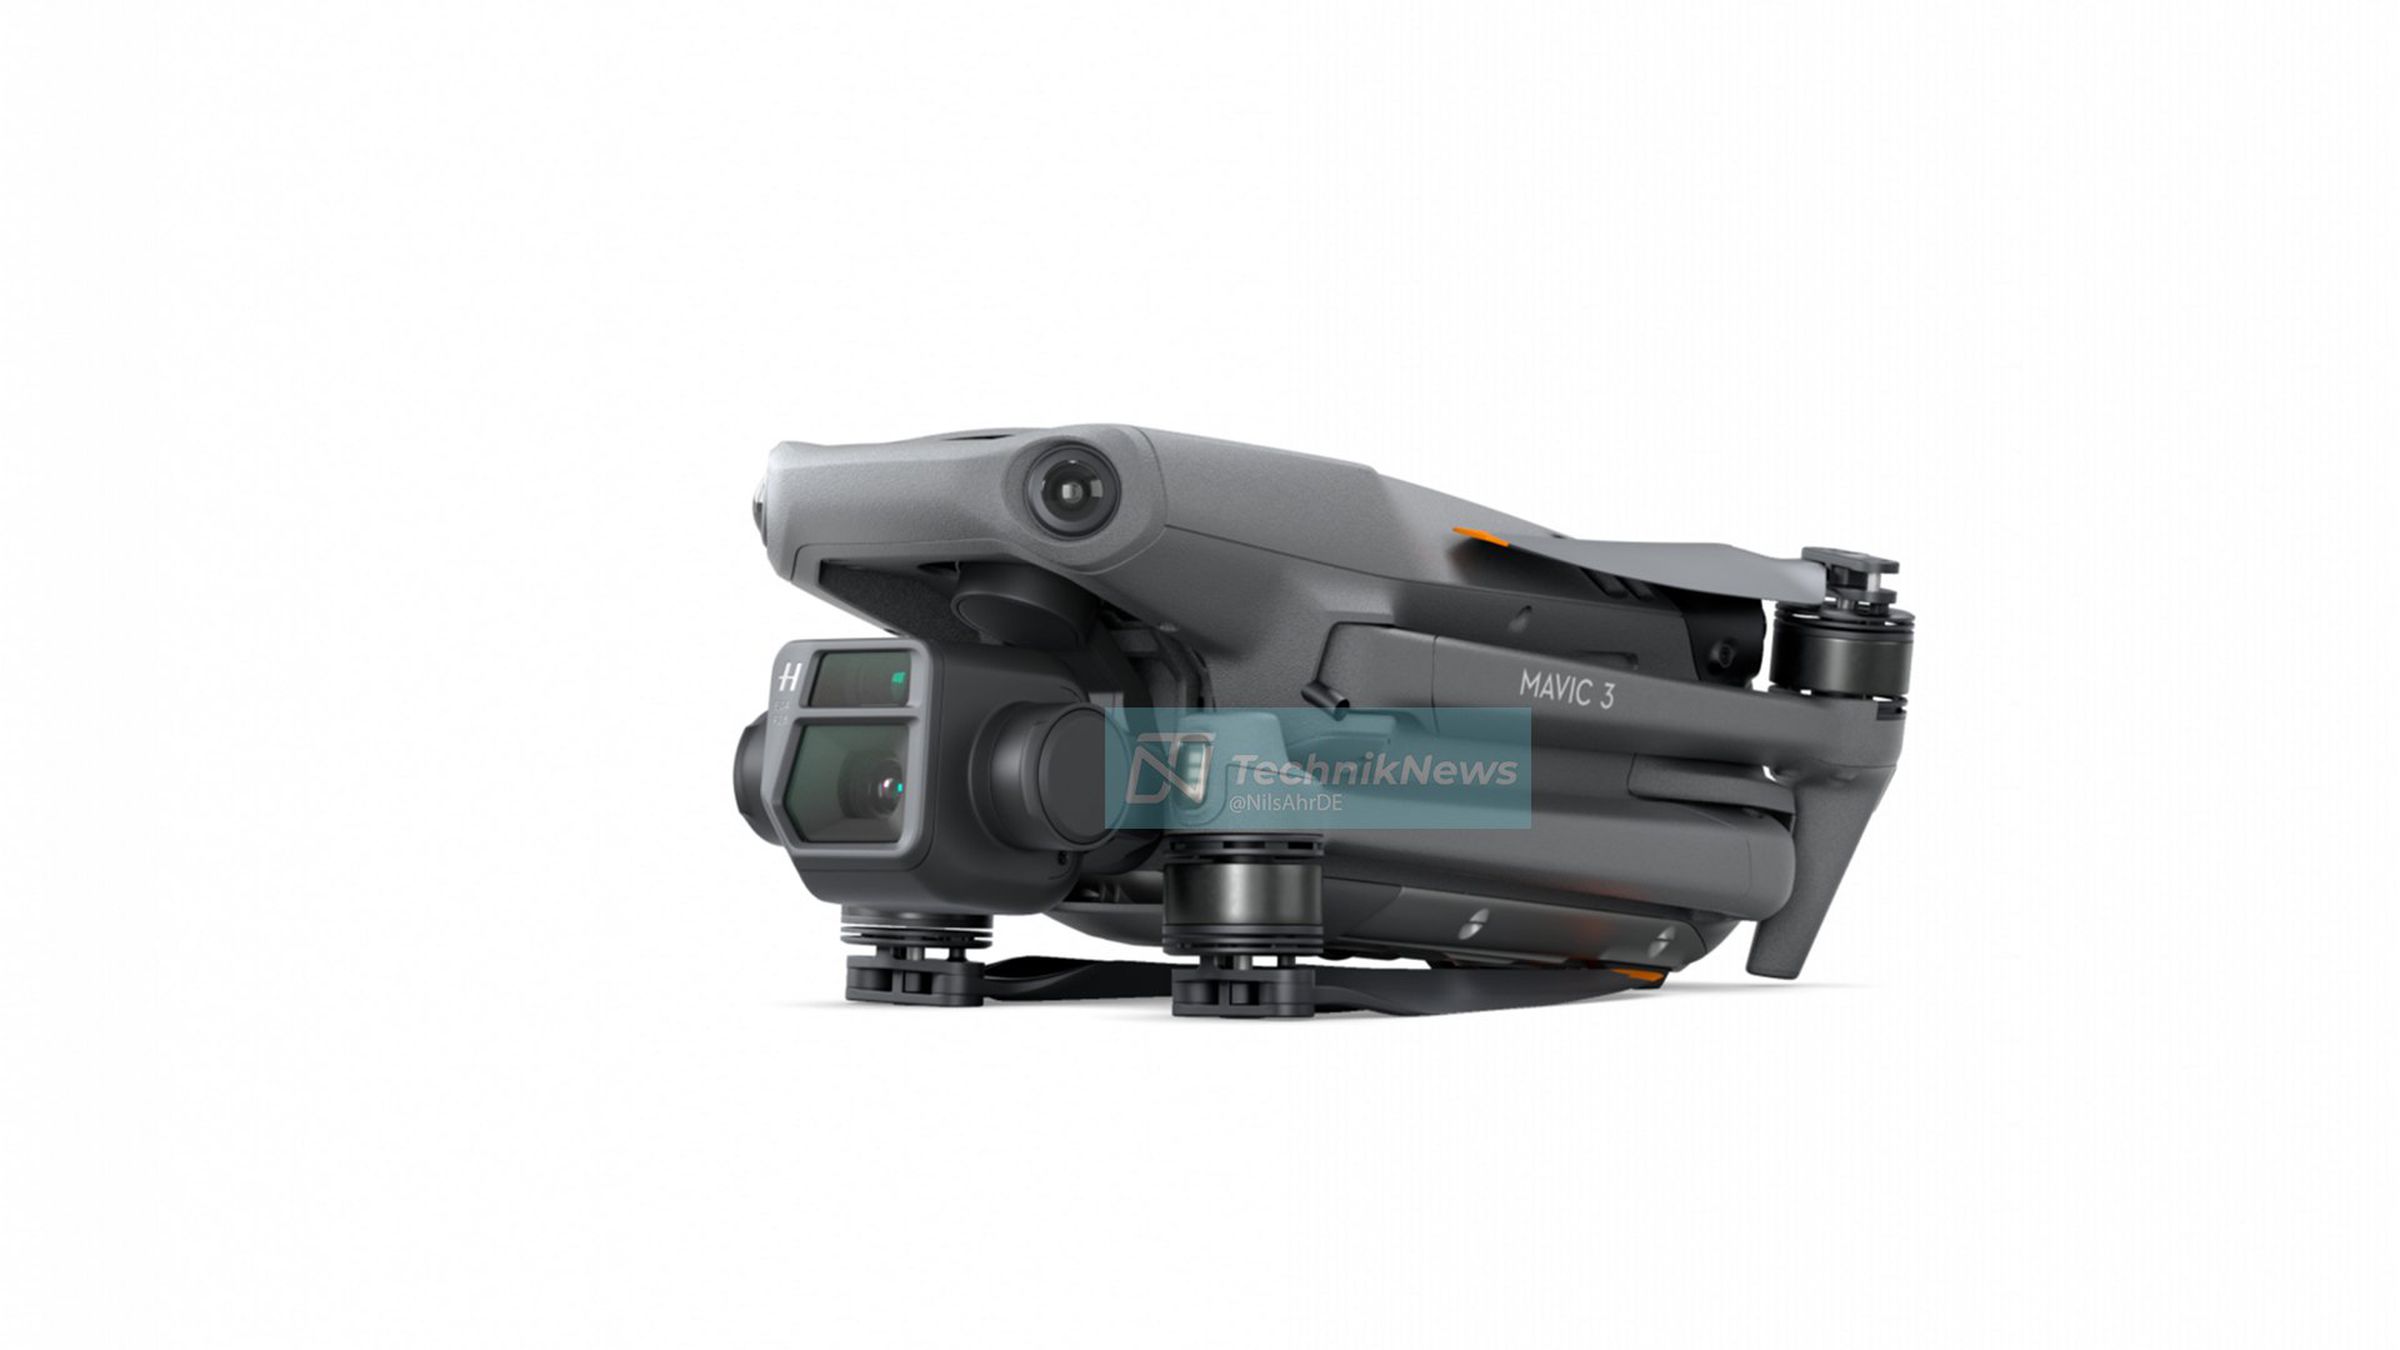 The Mavic 3 in its folded-up state, with its dual cameras.